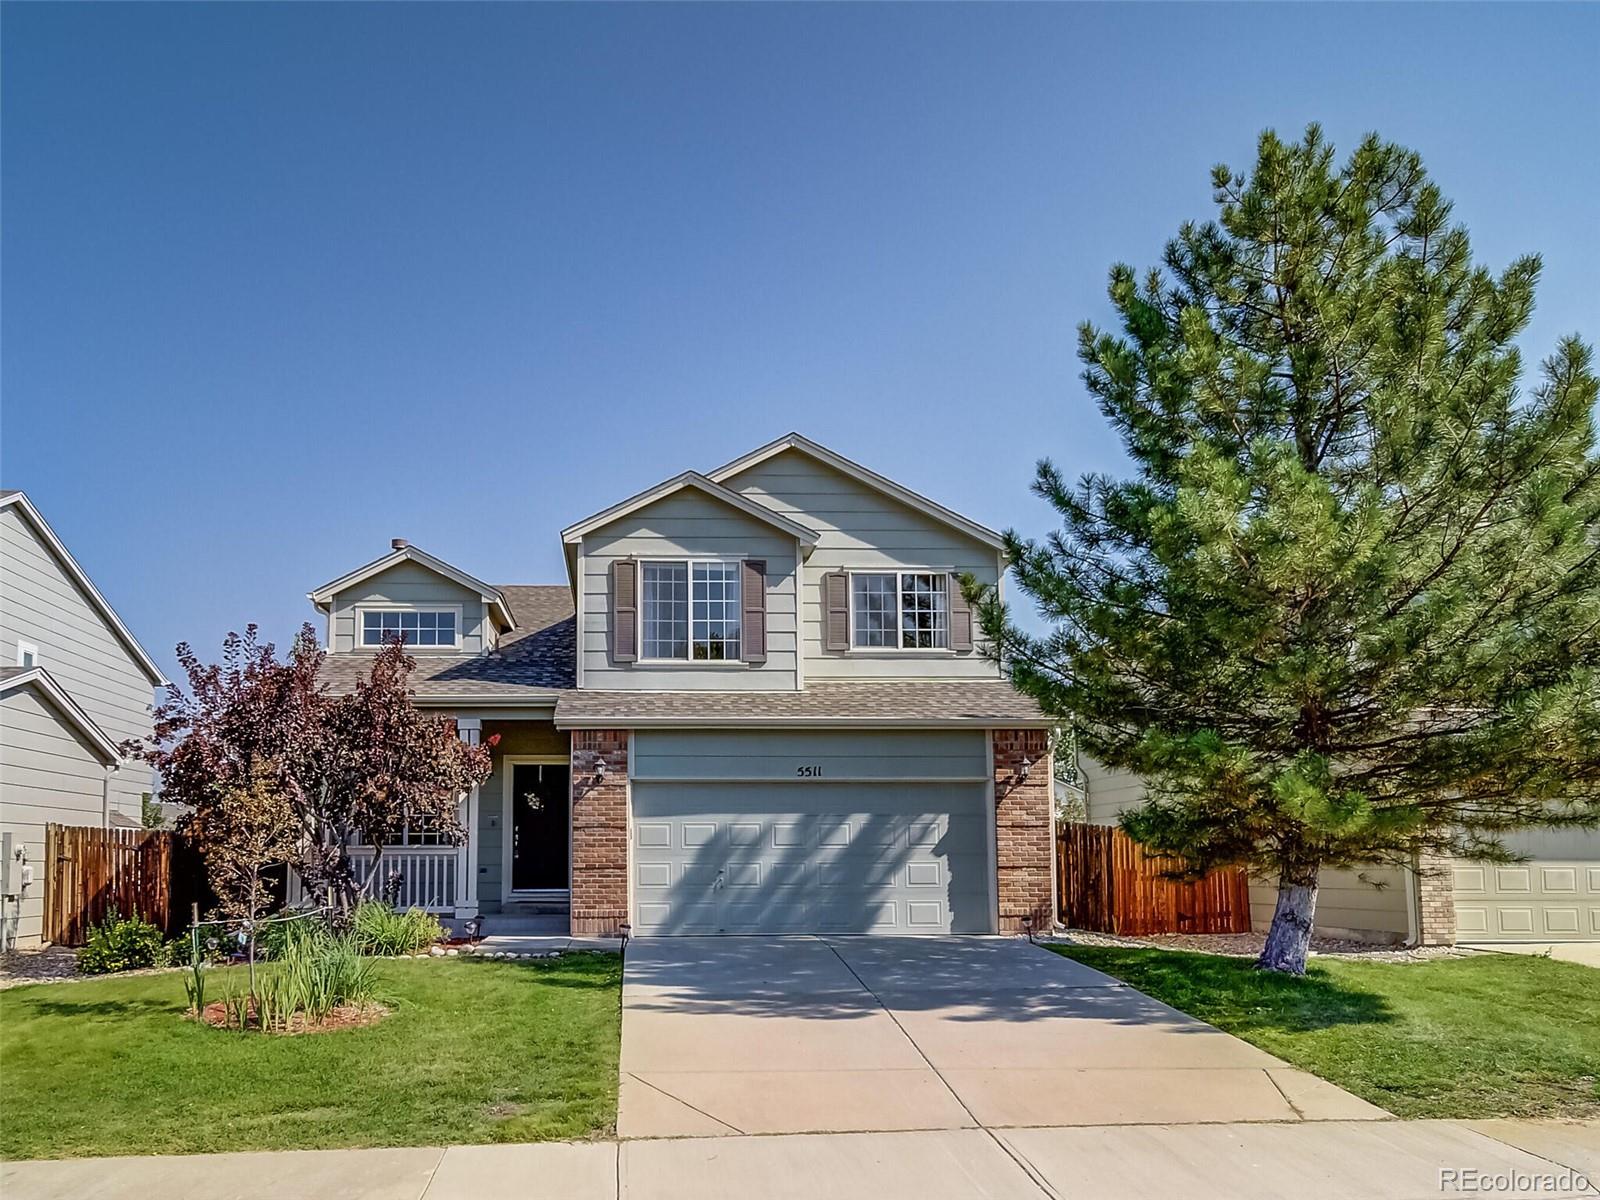 5511 s valdai way, Aurora sold home. Closed on 2024-03-29 for $580,000.